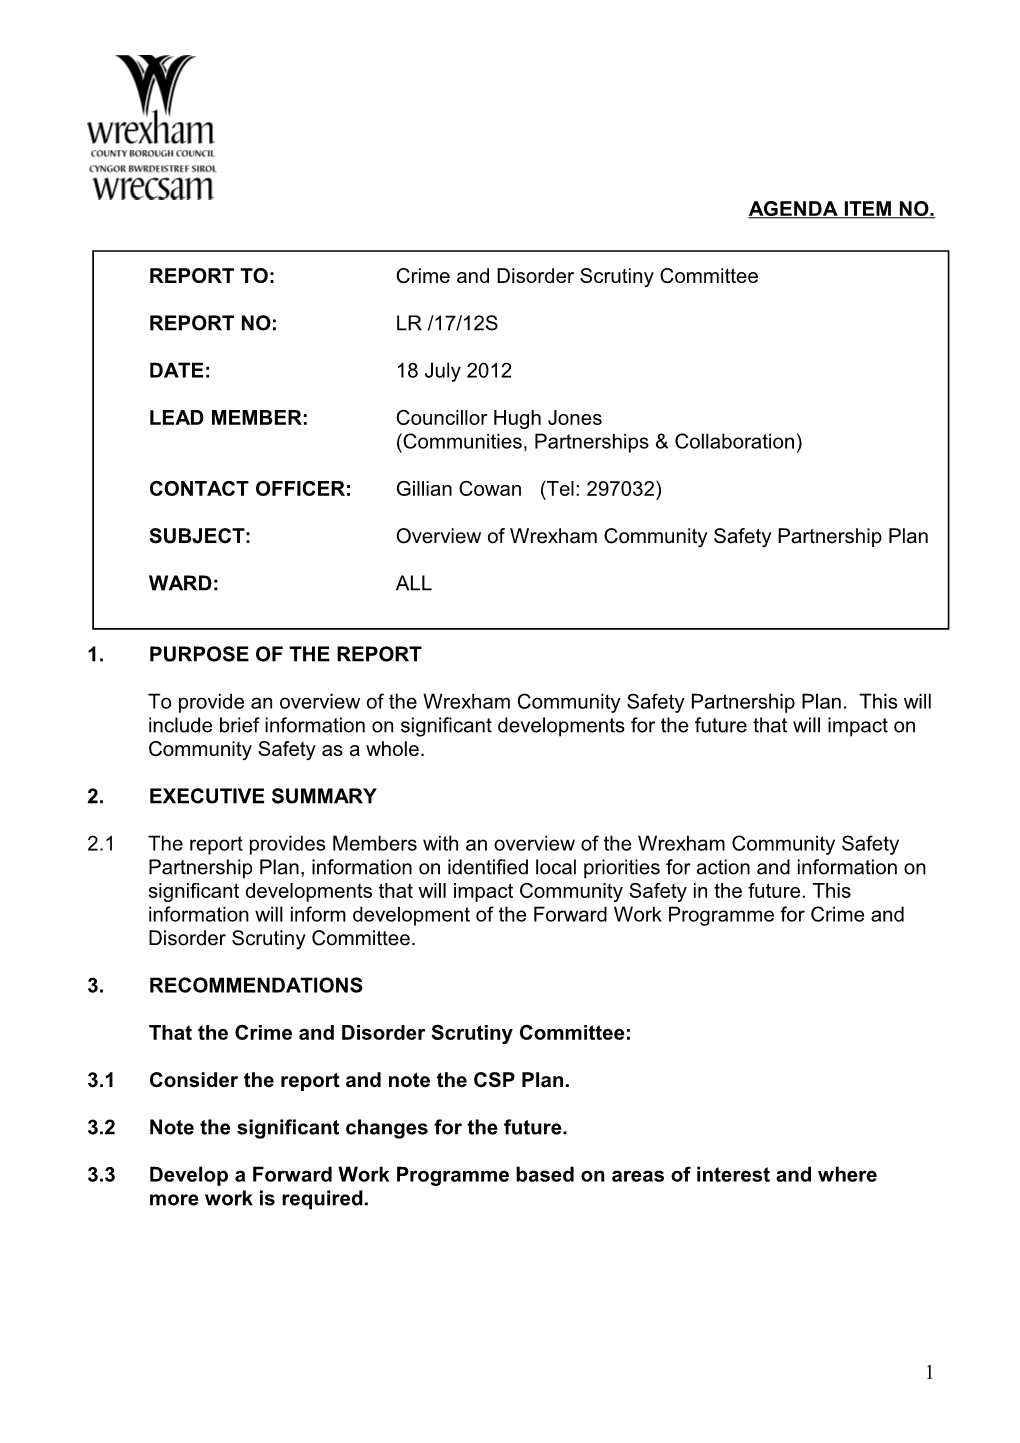 REPORT TO:Crime and Disorder Scrutiny Committee